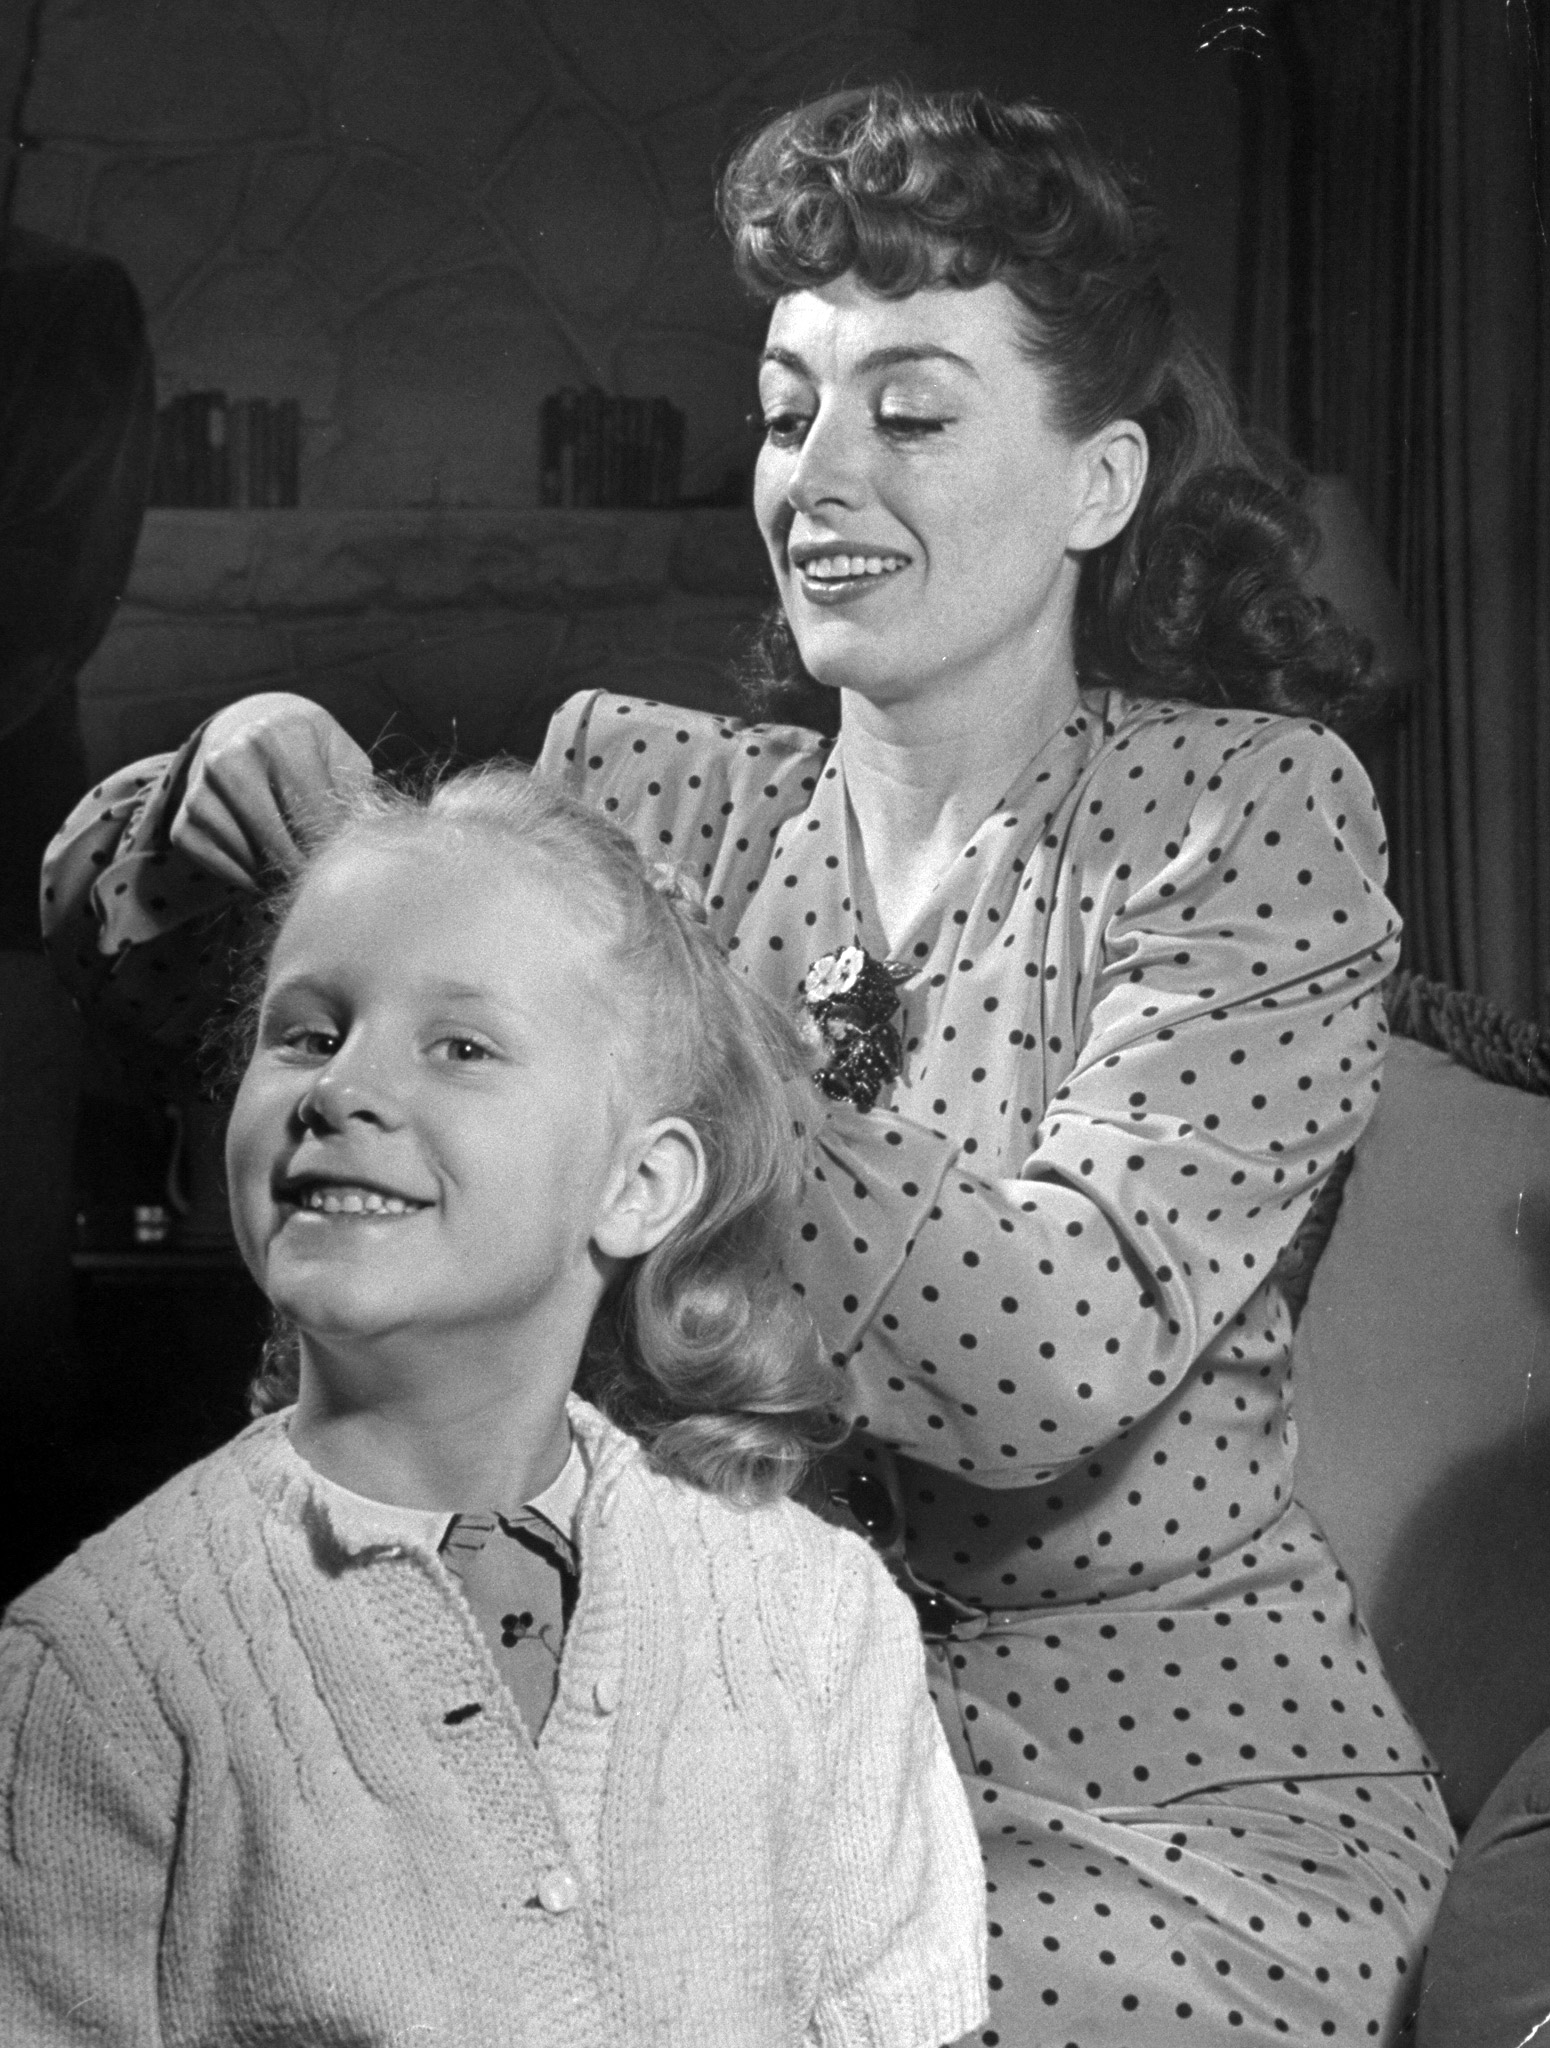 Joan Crawford fixing her adopted daughter Christina Crawford's hair, with the 5-year-old smiling proudly. 1945.